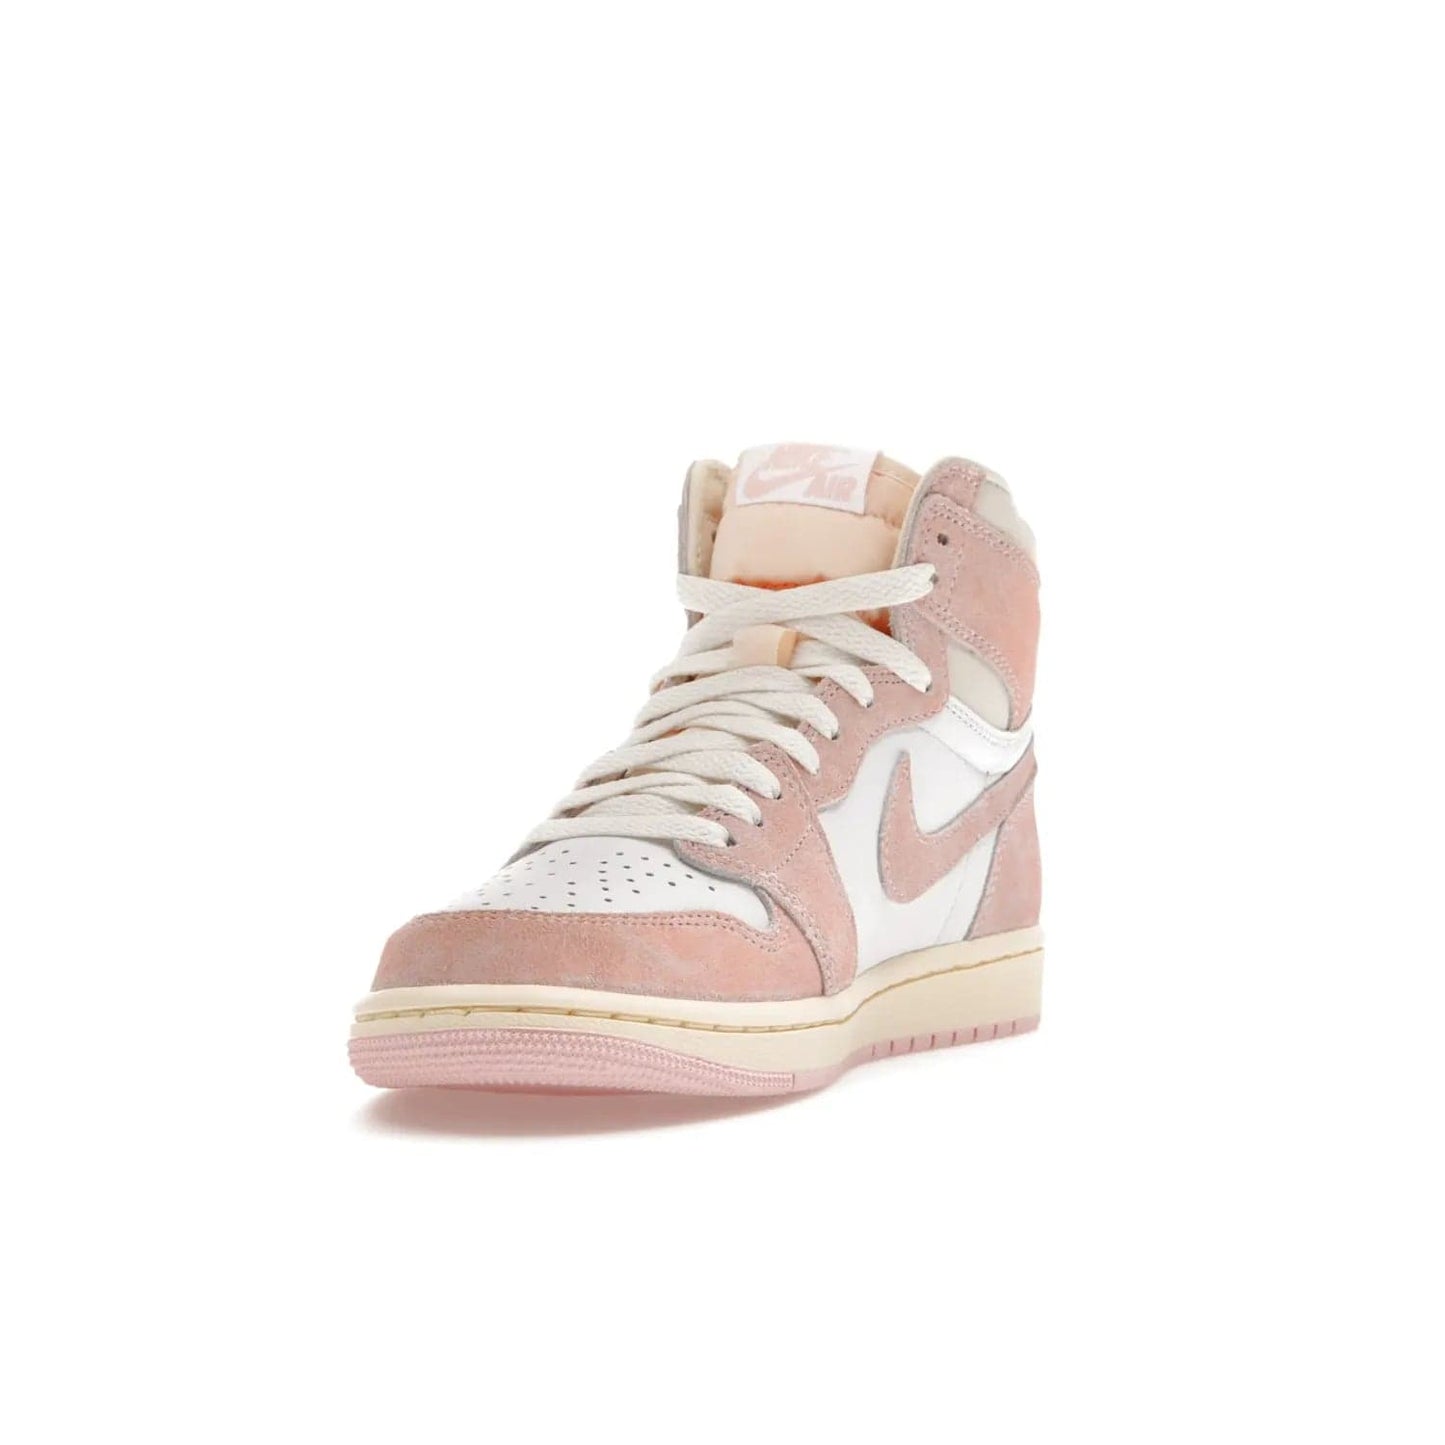 Jordan 1 Retro High OG Washed Pink (Women's) - Image 13 - Only at www.BallersClubKickz.com - Iconic Air Jordan 1 Retro High OG for women with unique pink suede and white leather uppers. Get the timeless look on April 22, 2023.